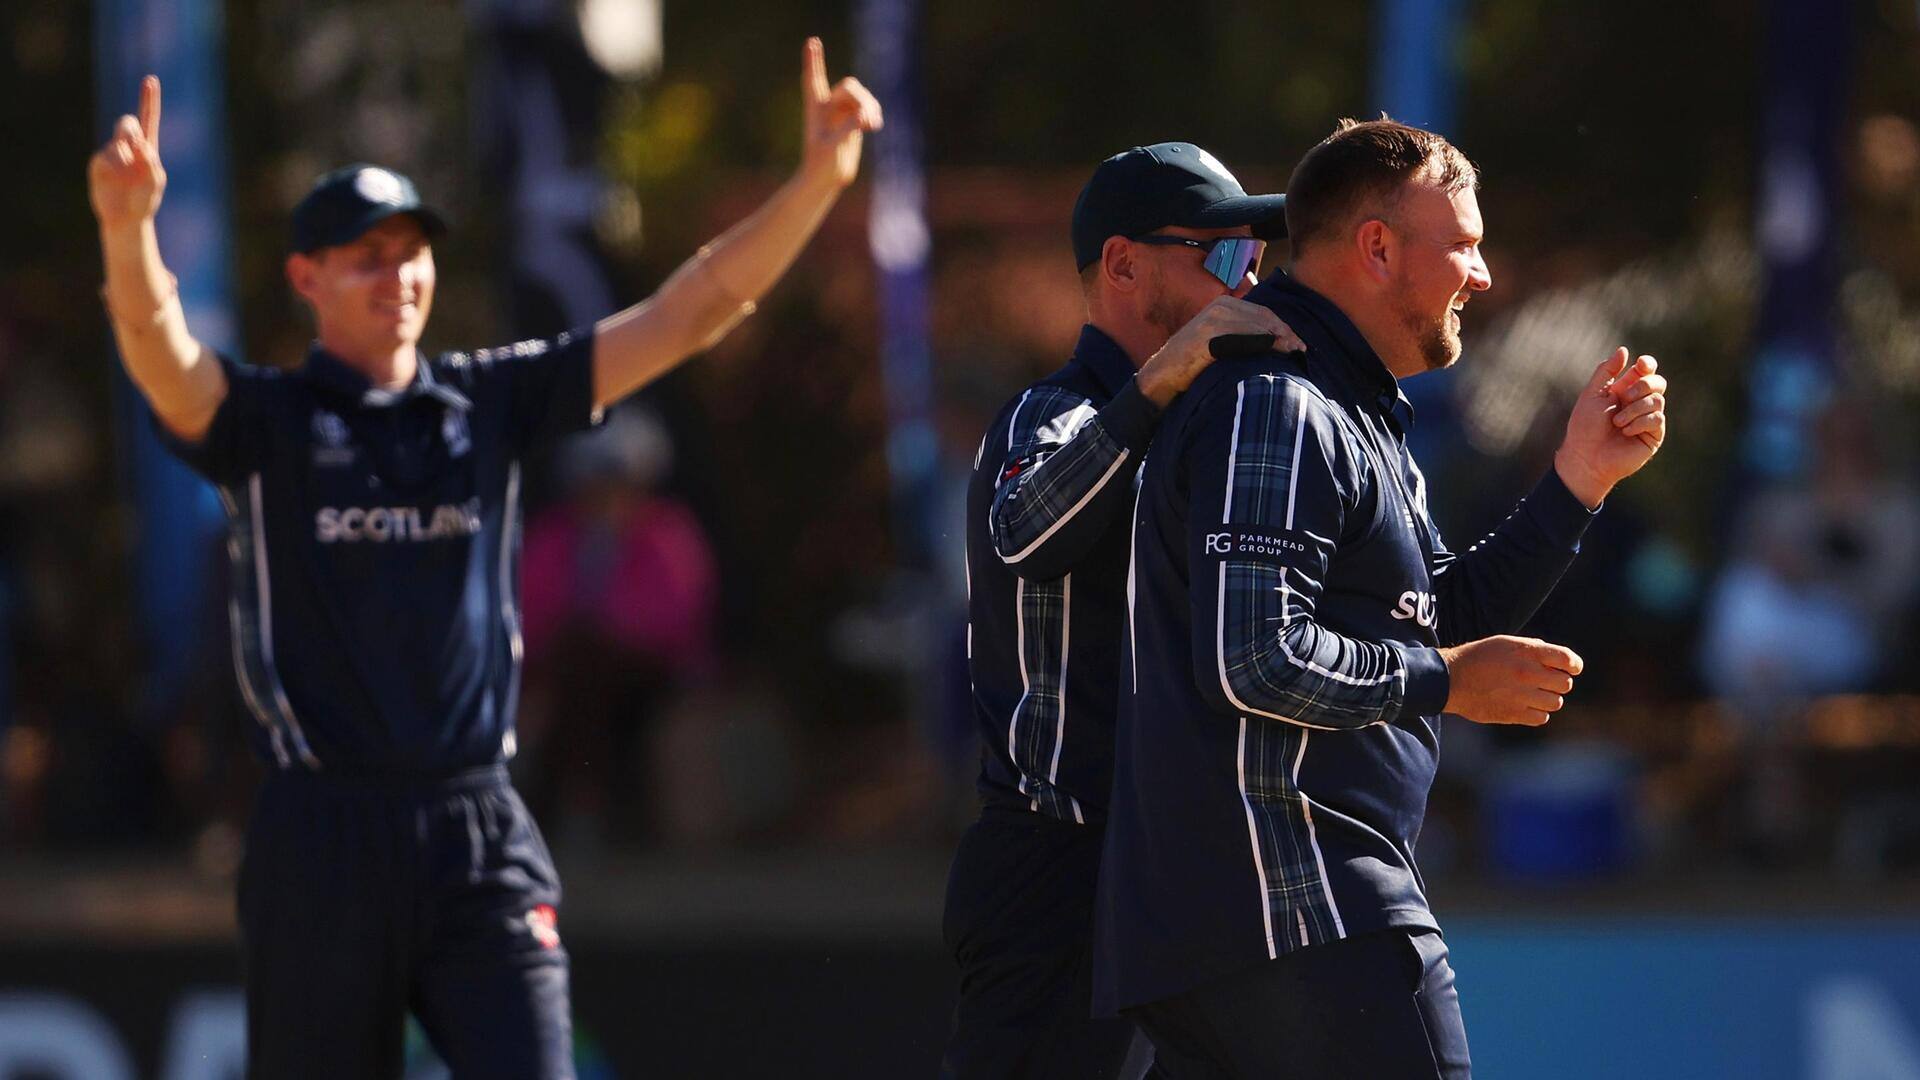 CWC Qualifiers, Scotland maintain a perfect record against Oman: Stats